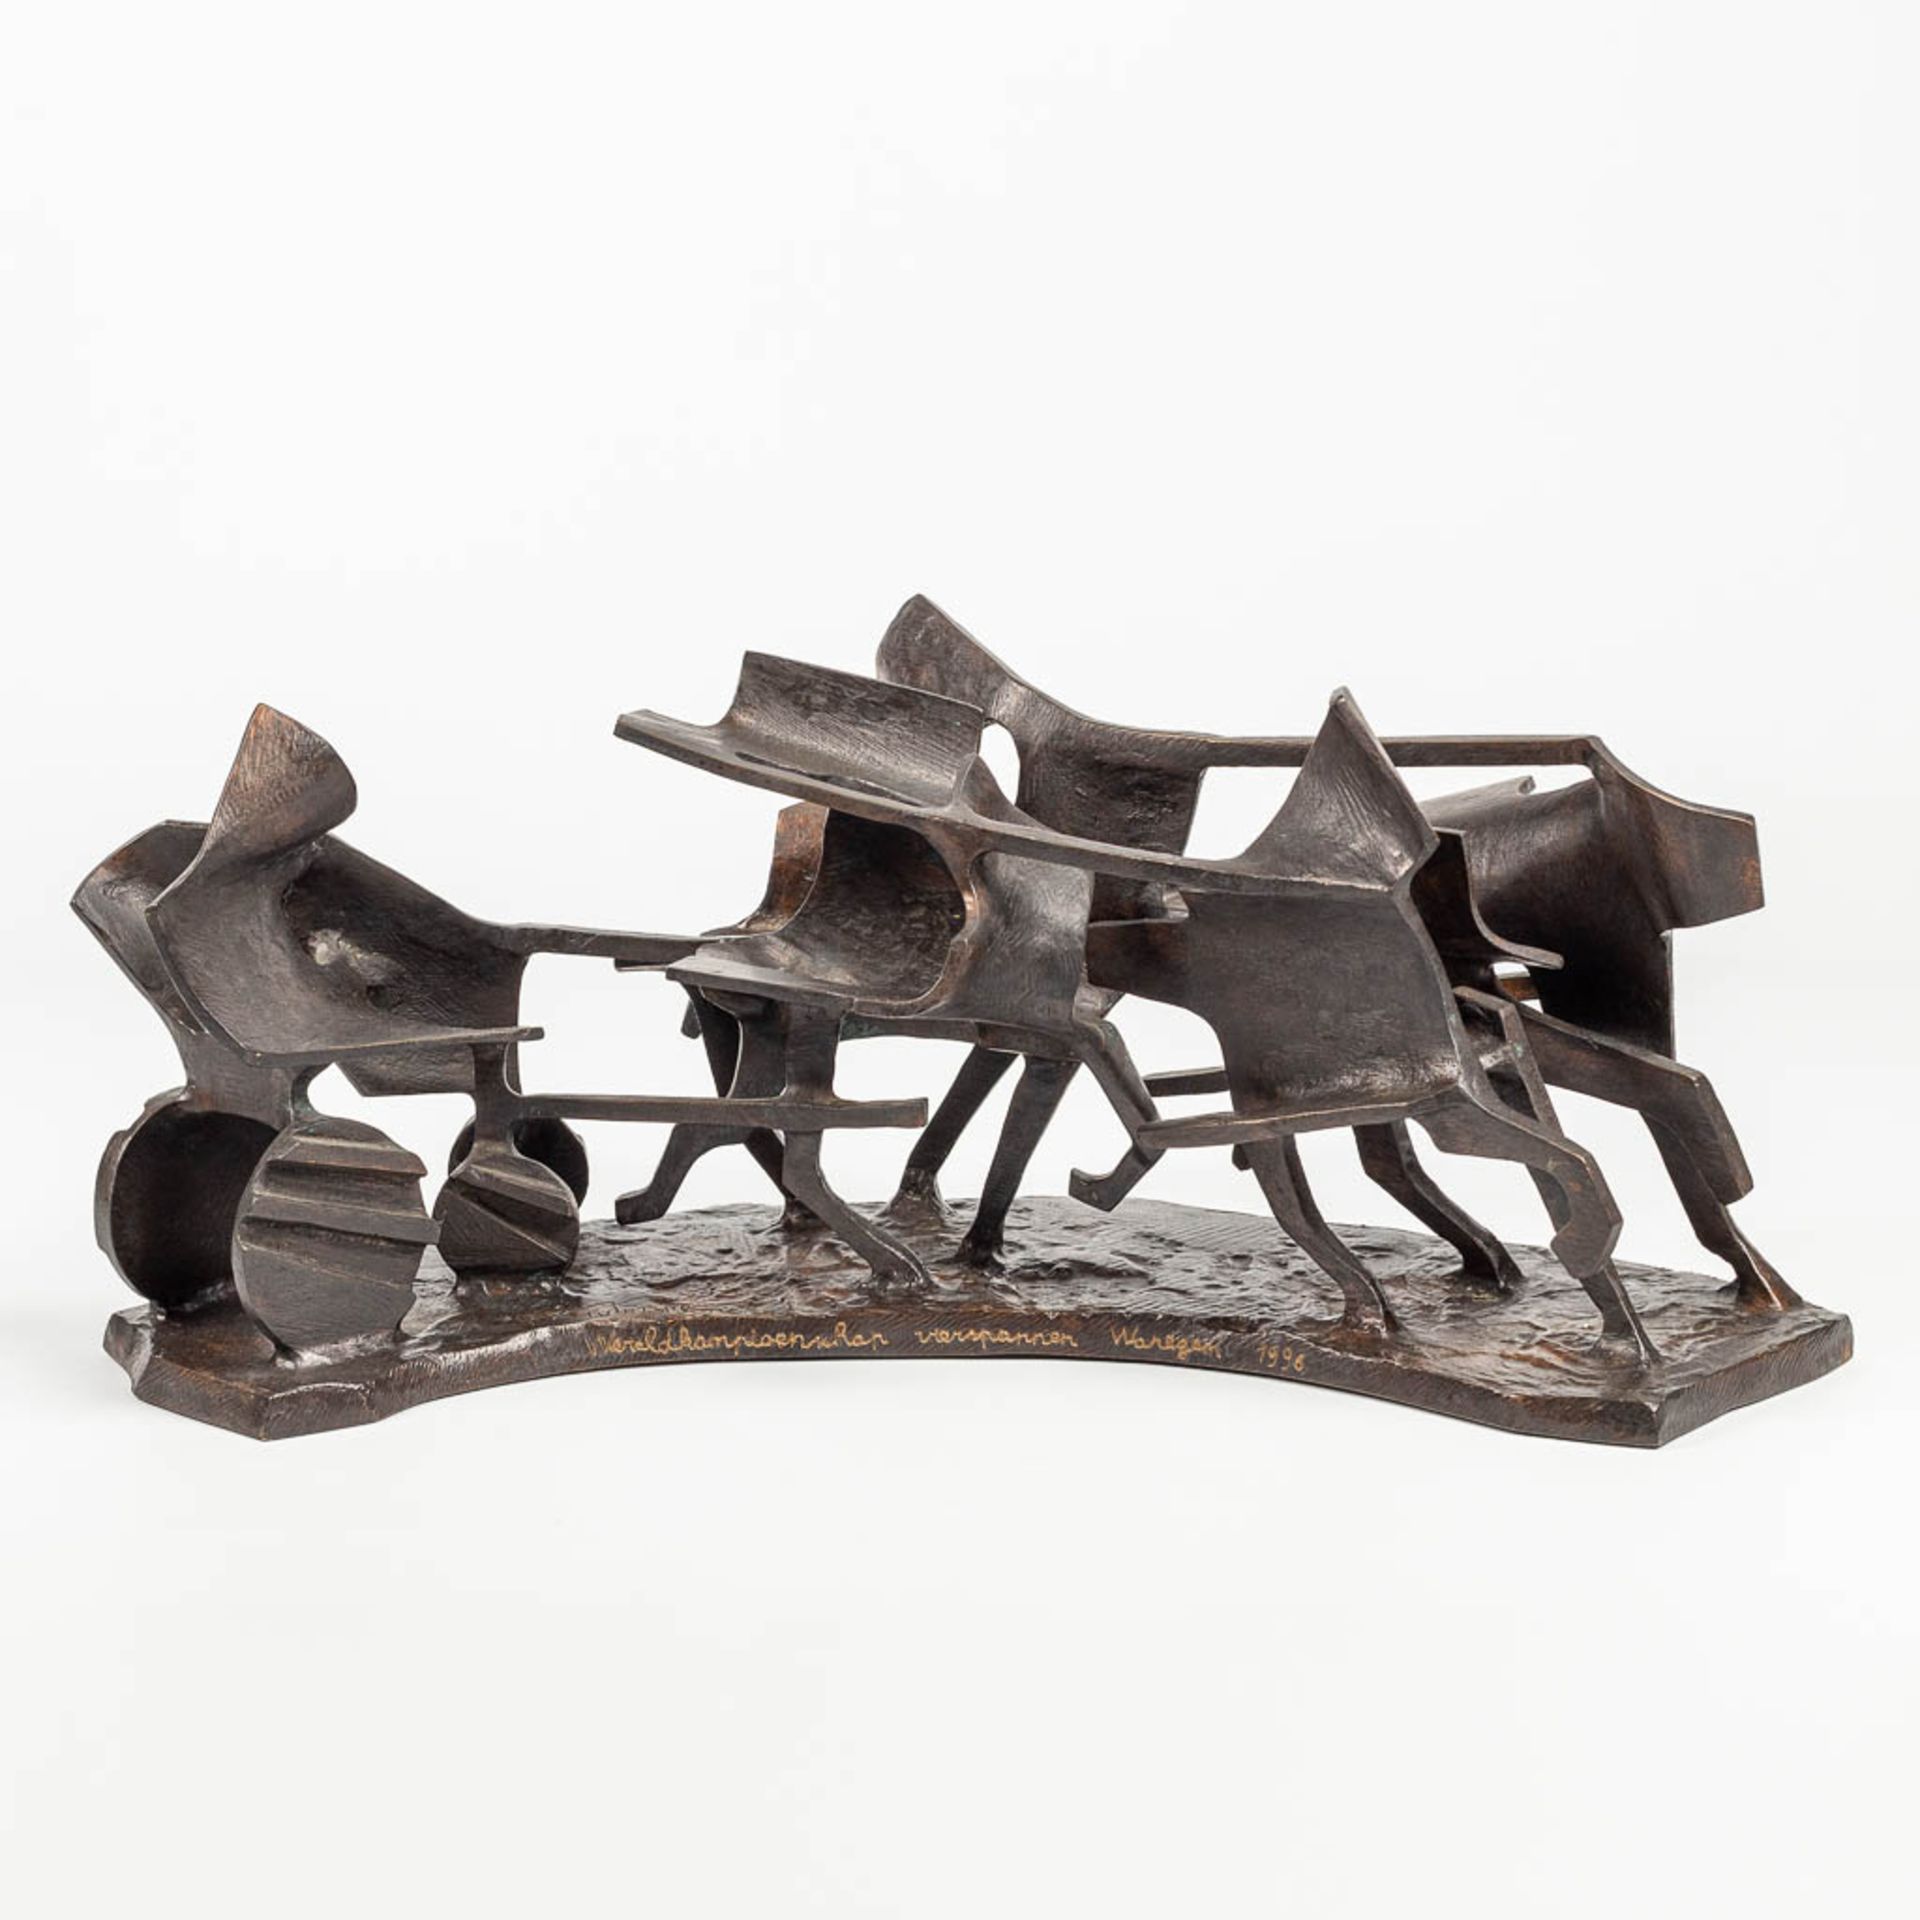 Fernand VANDERPLANCKE (1938) 'Vierspan' an abstract bronze statue of a horse-drawn carriage